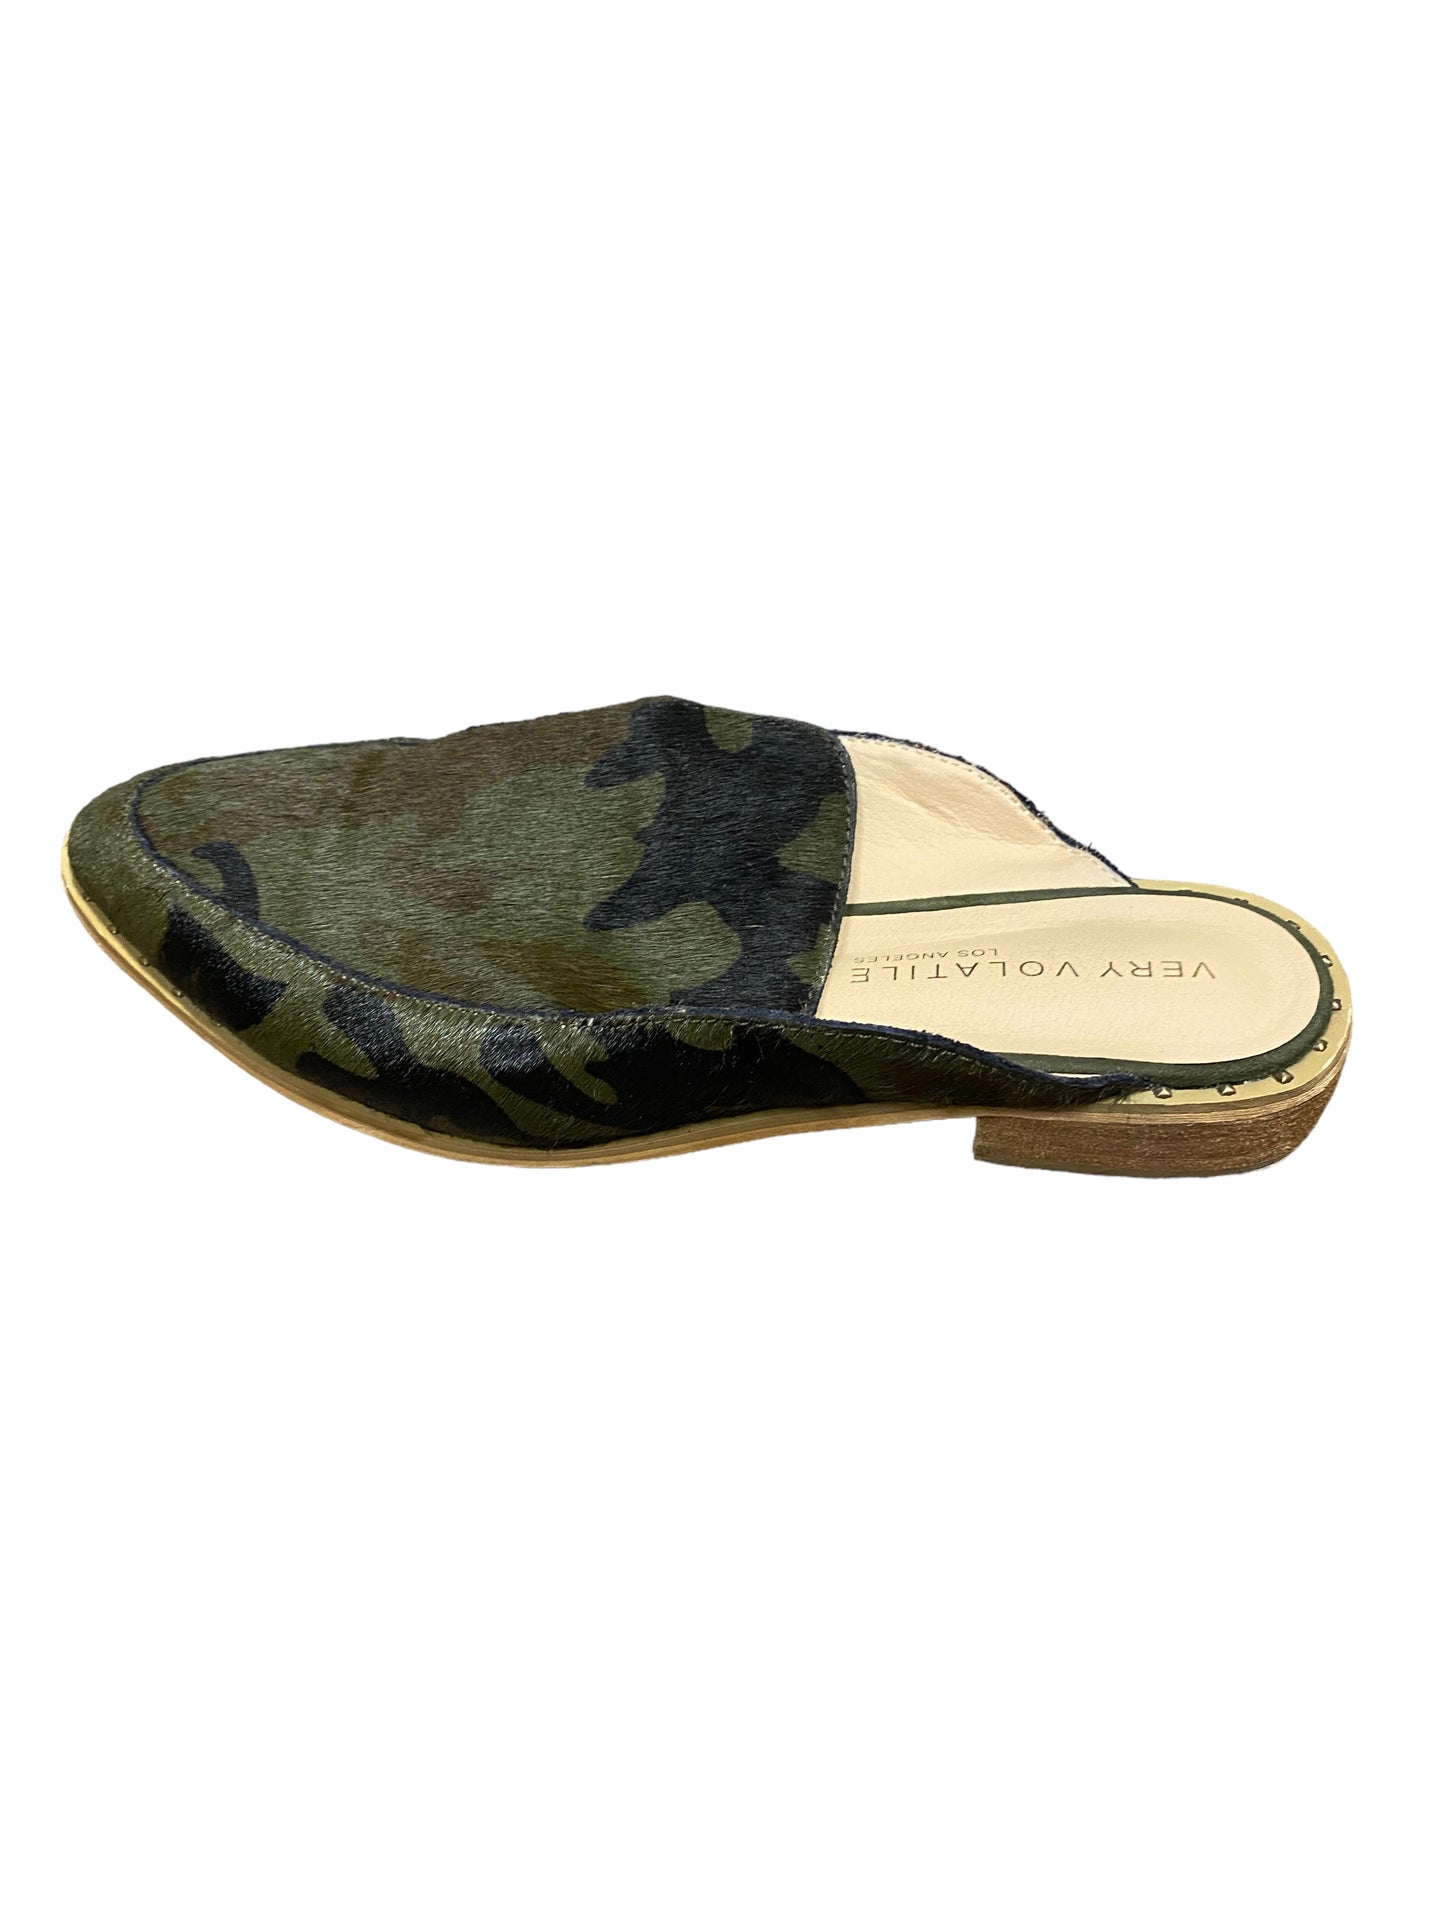 Camouflage Print Shoes Flats Very Volatile, Size 10